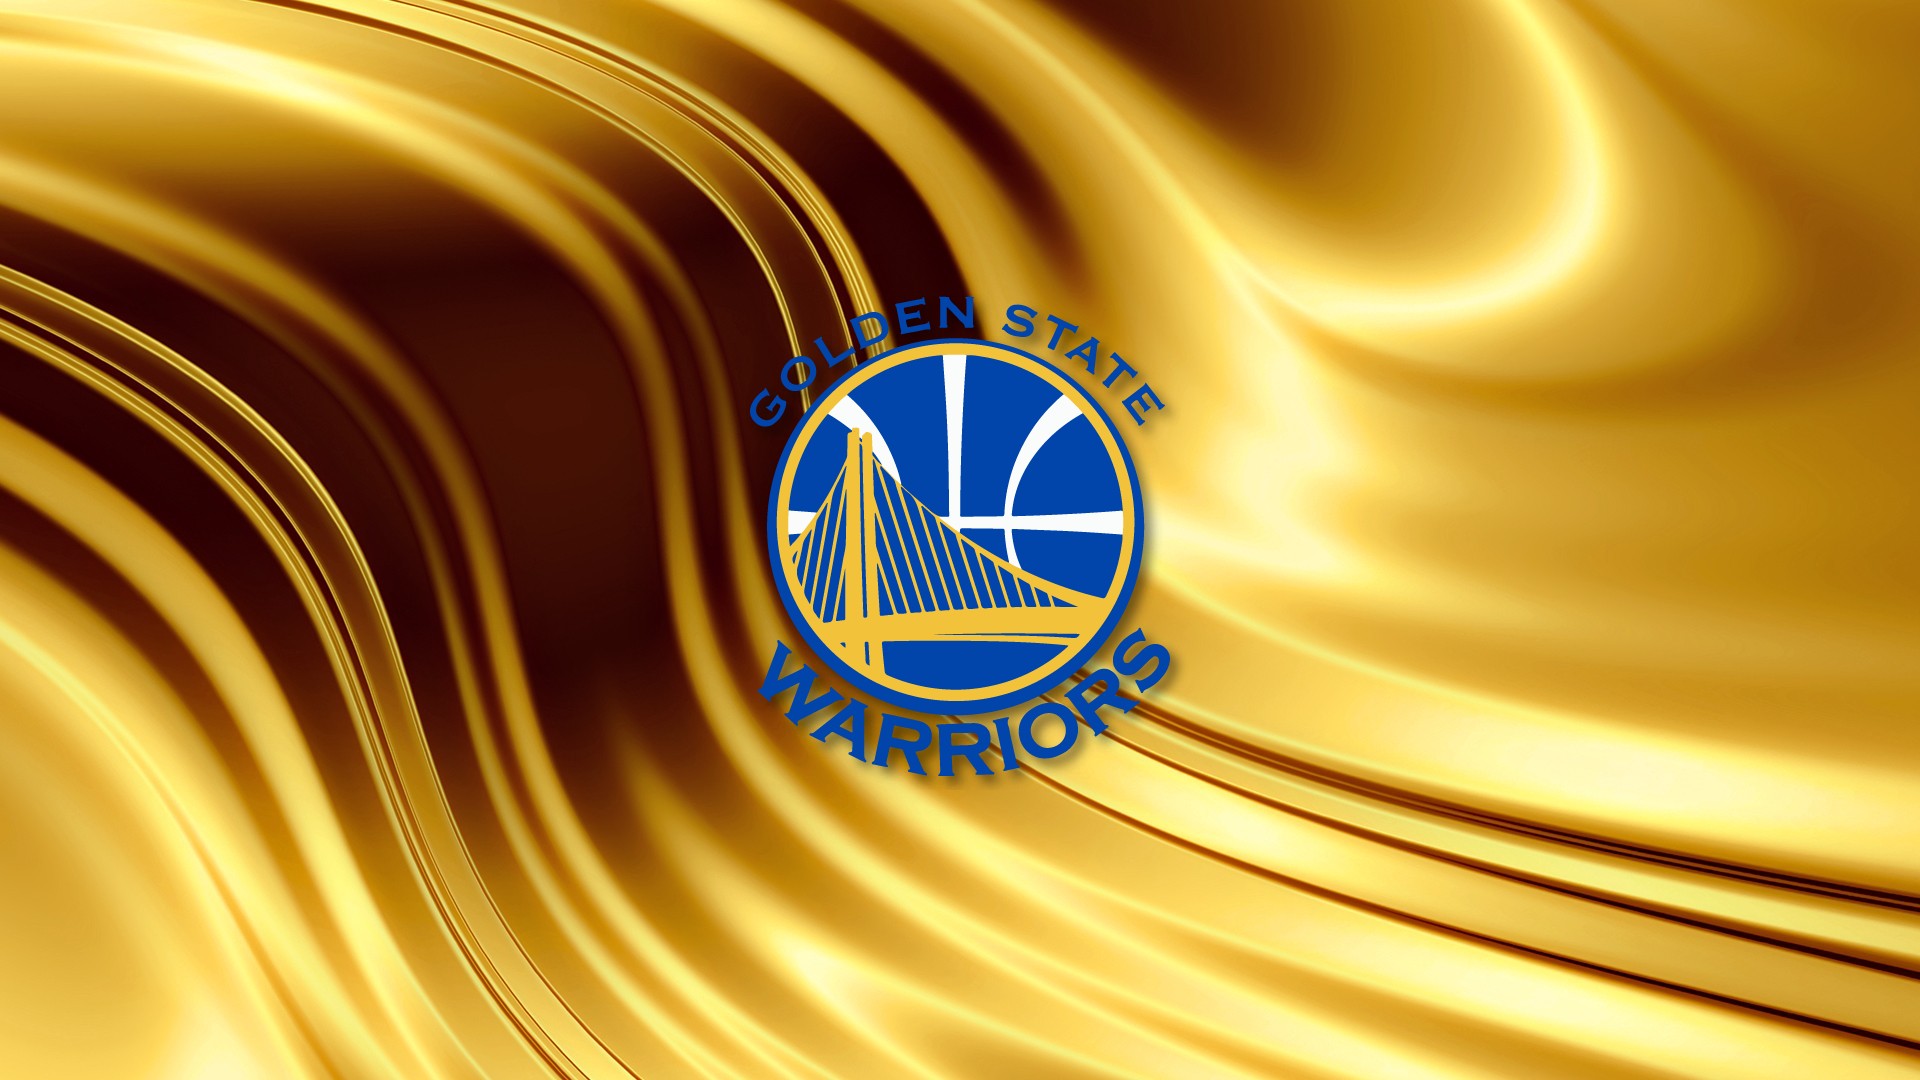 Golden State Warriors Desktop Wallpaper with resolution 1920X1080 pixel. You can use this wallpaper as background for your desktop Computer Screensavers, Android or iPhone smartphones